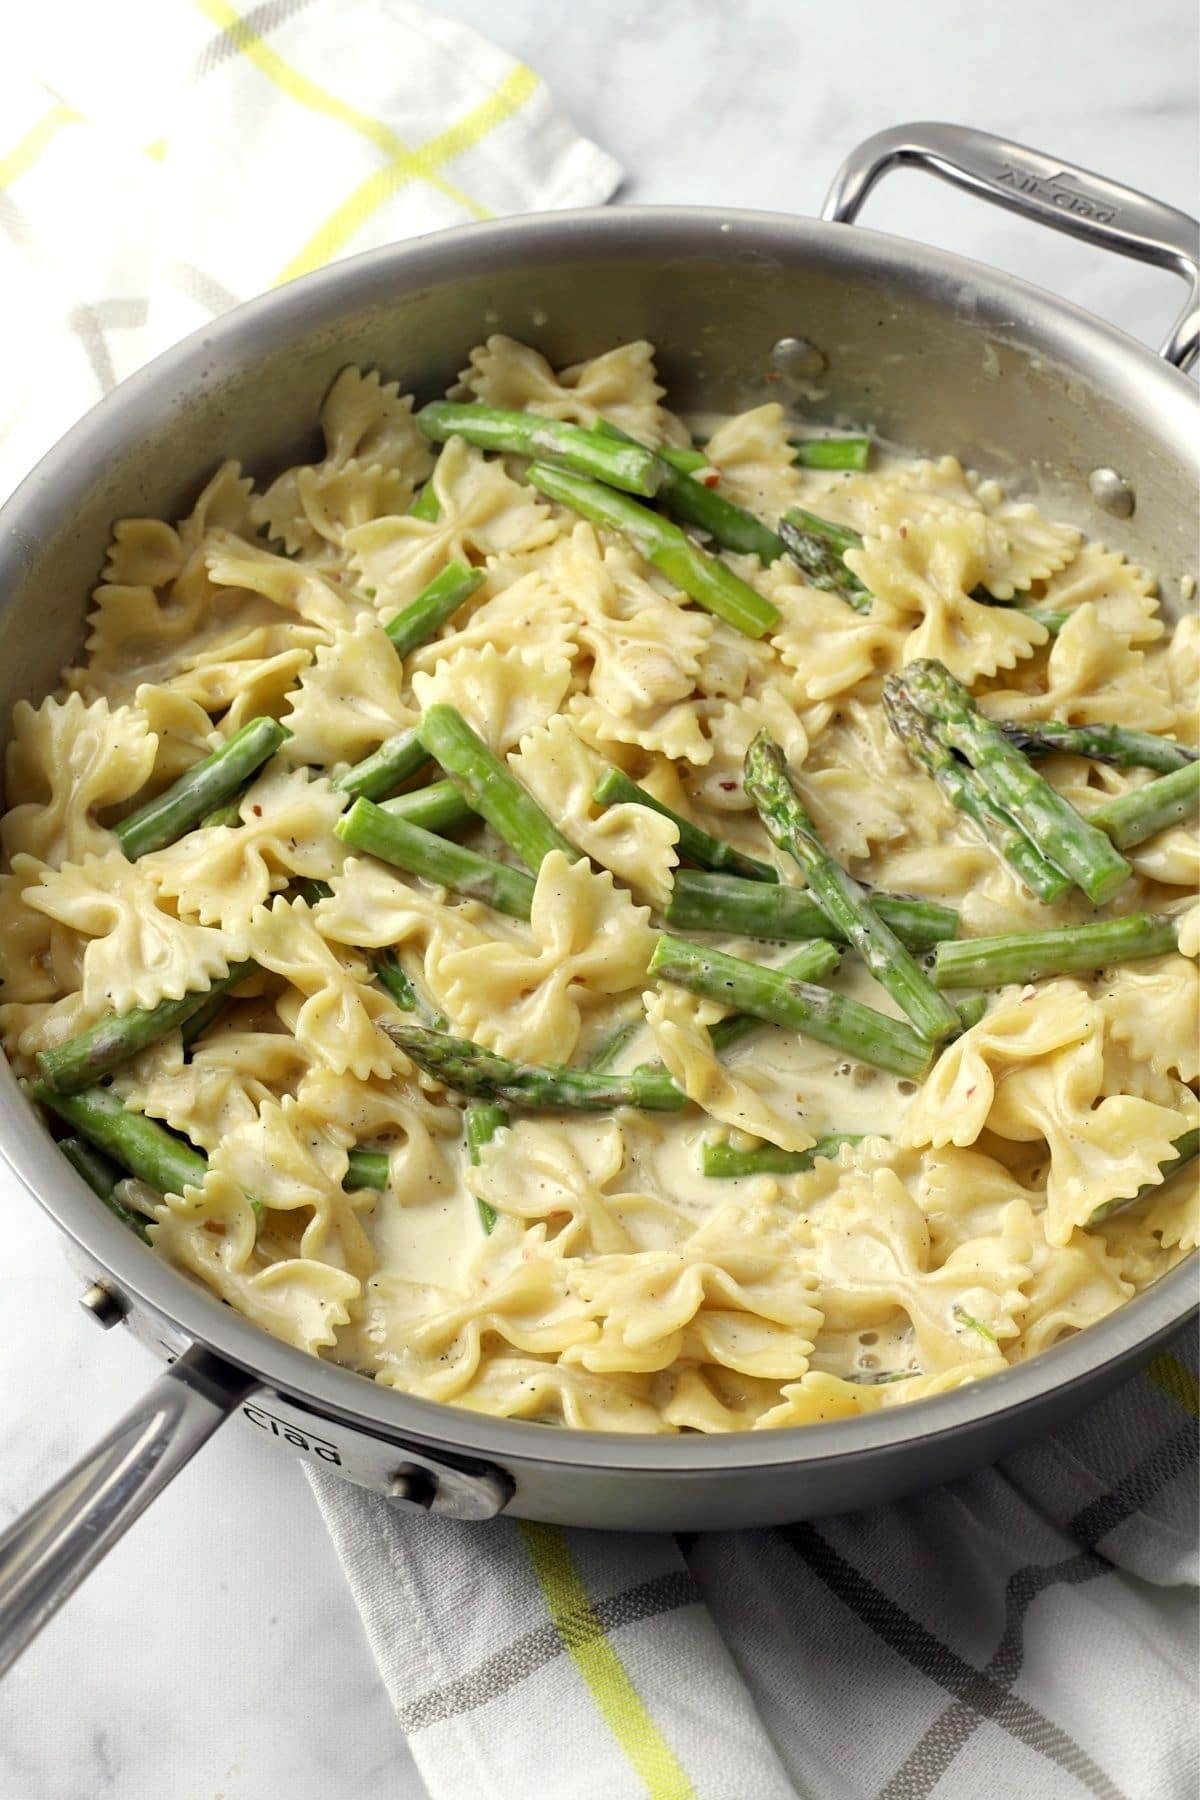 Bowtie pasta and asparagus in a cream sauce in skillet